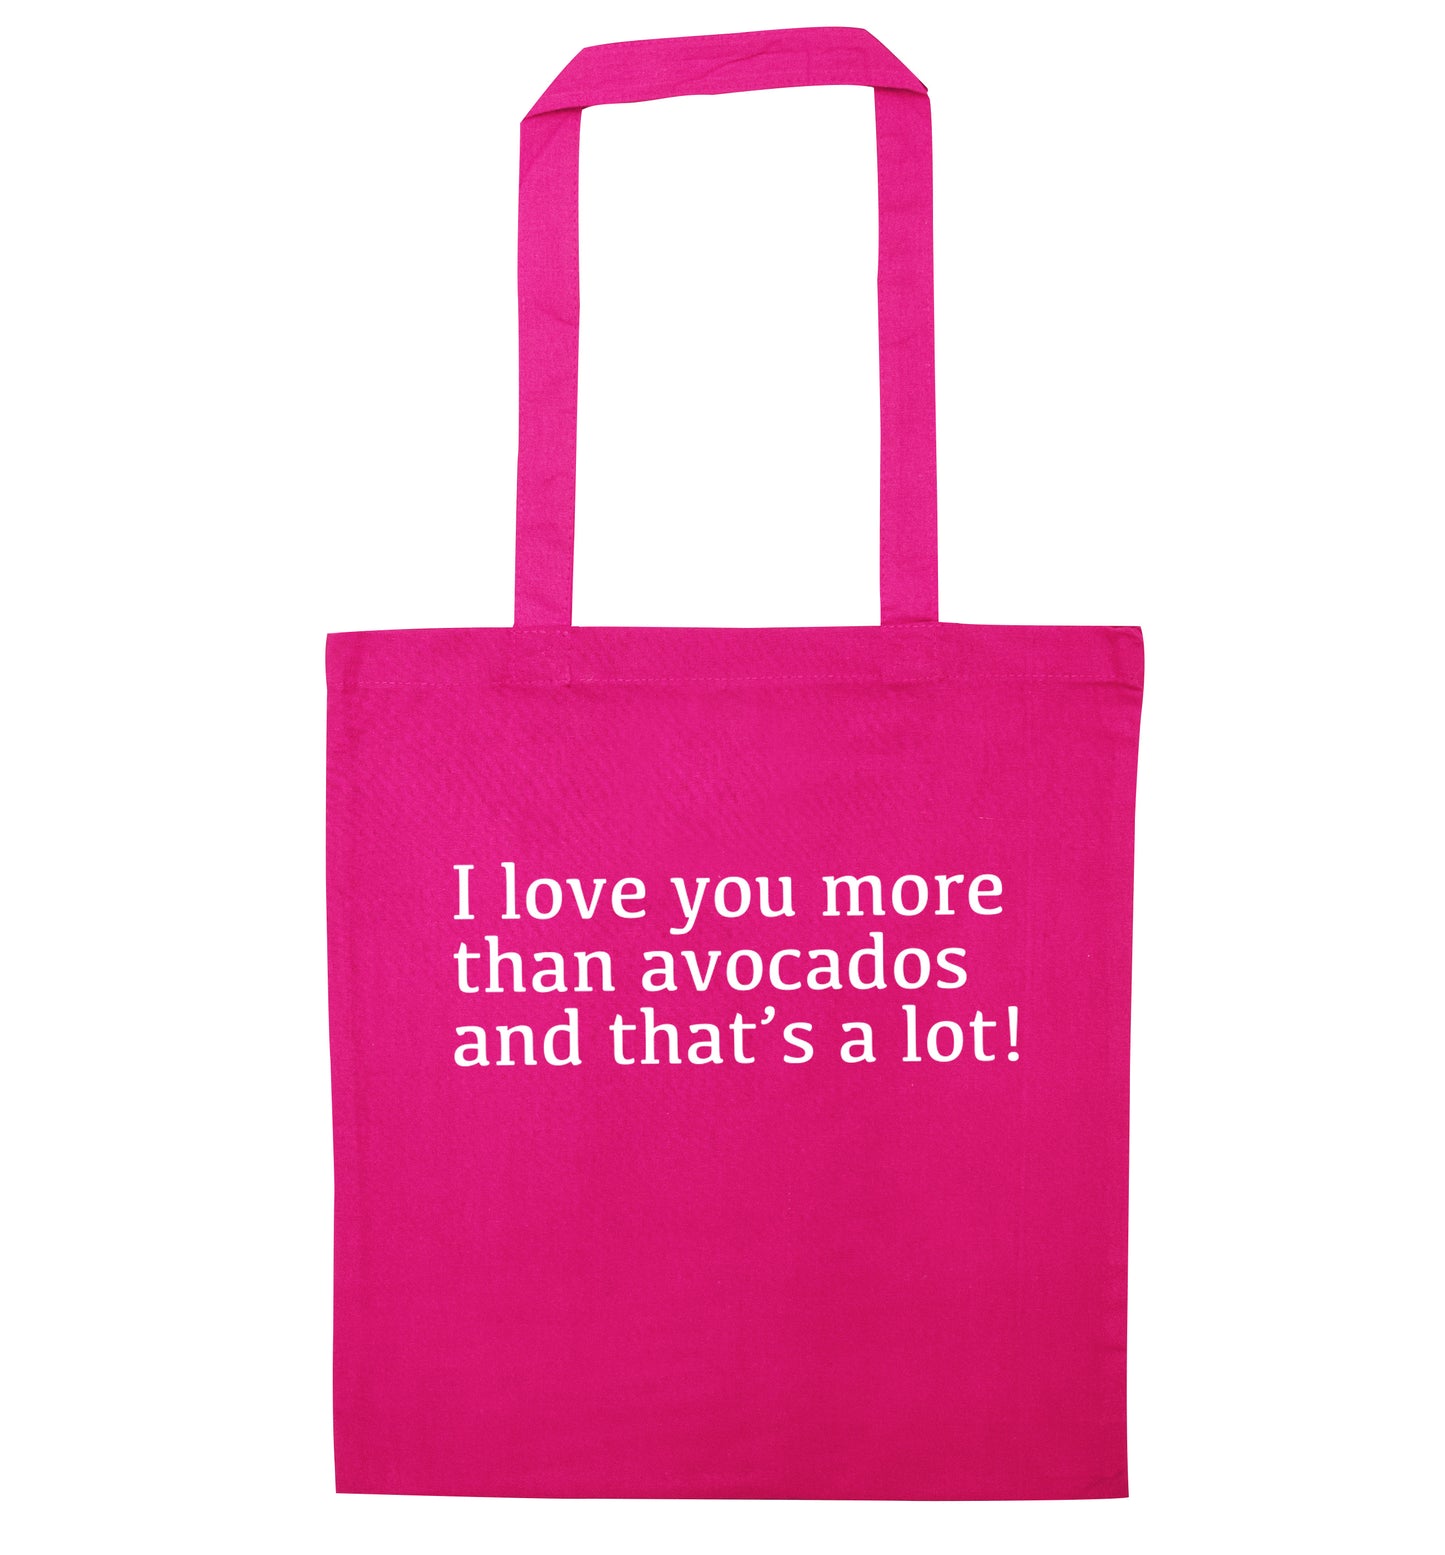 I love you more than avocados and that's a lot pink tote bag